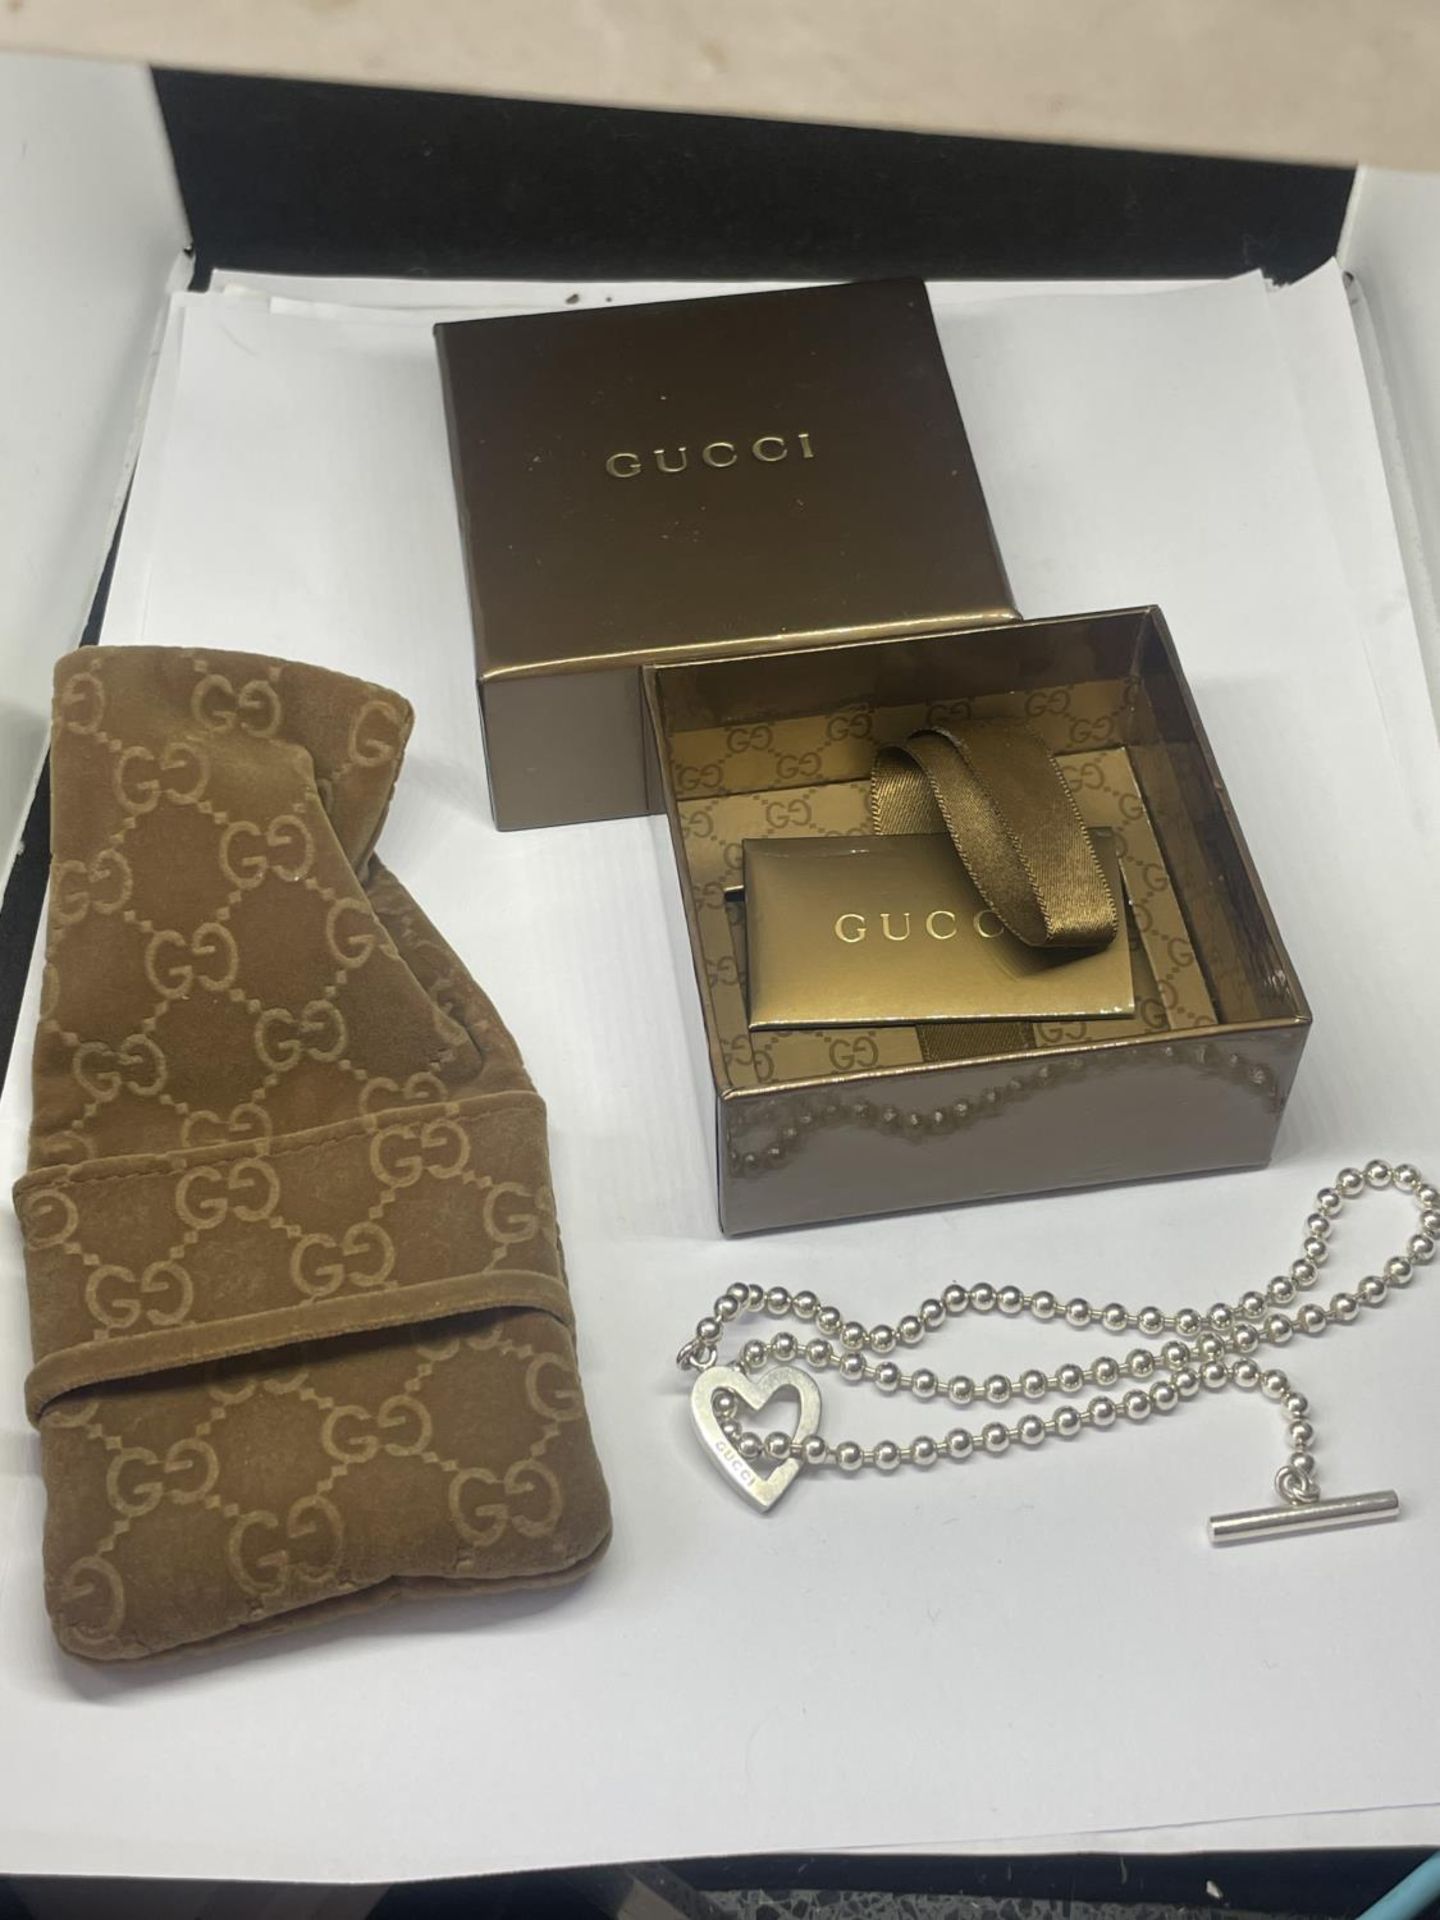 A GUCCI SILVER NECKLACE WITH POUCH AND PRESENTATION BOX